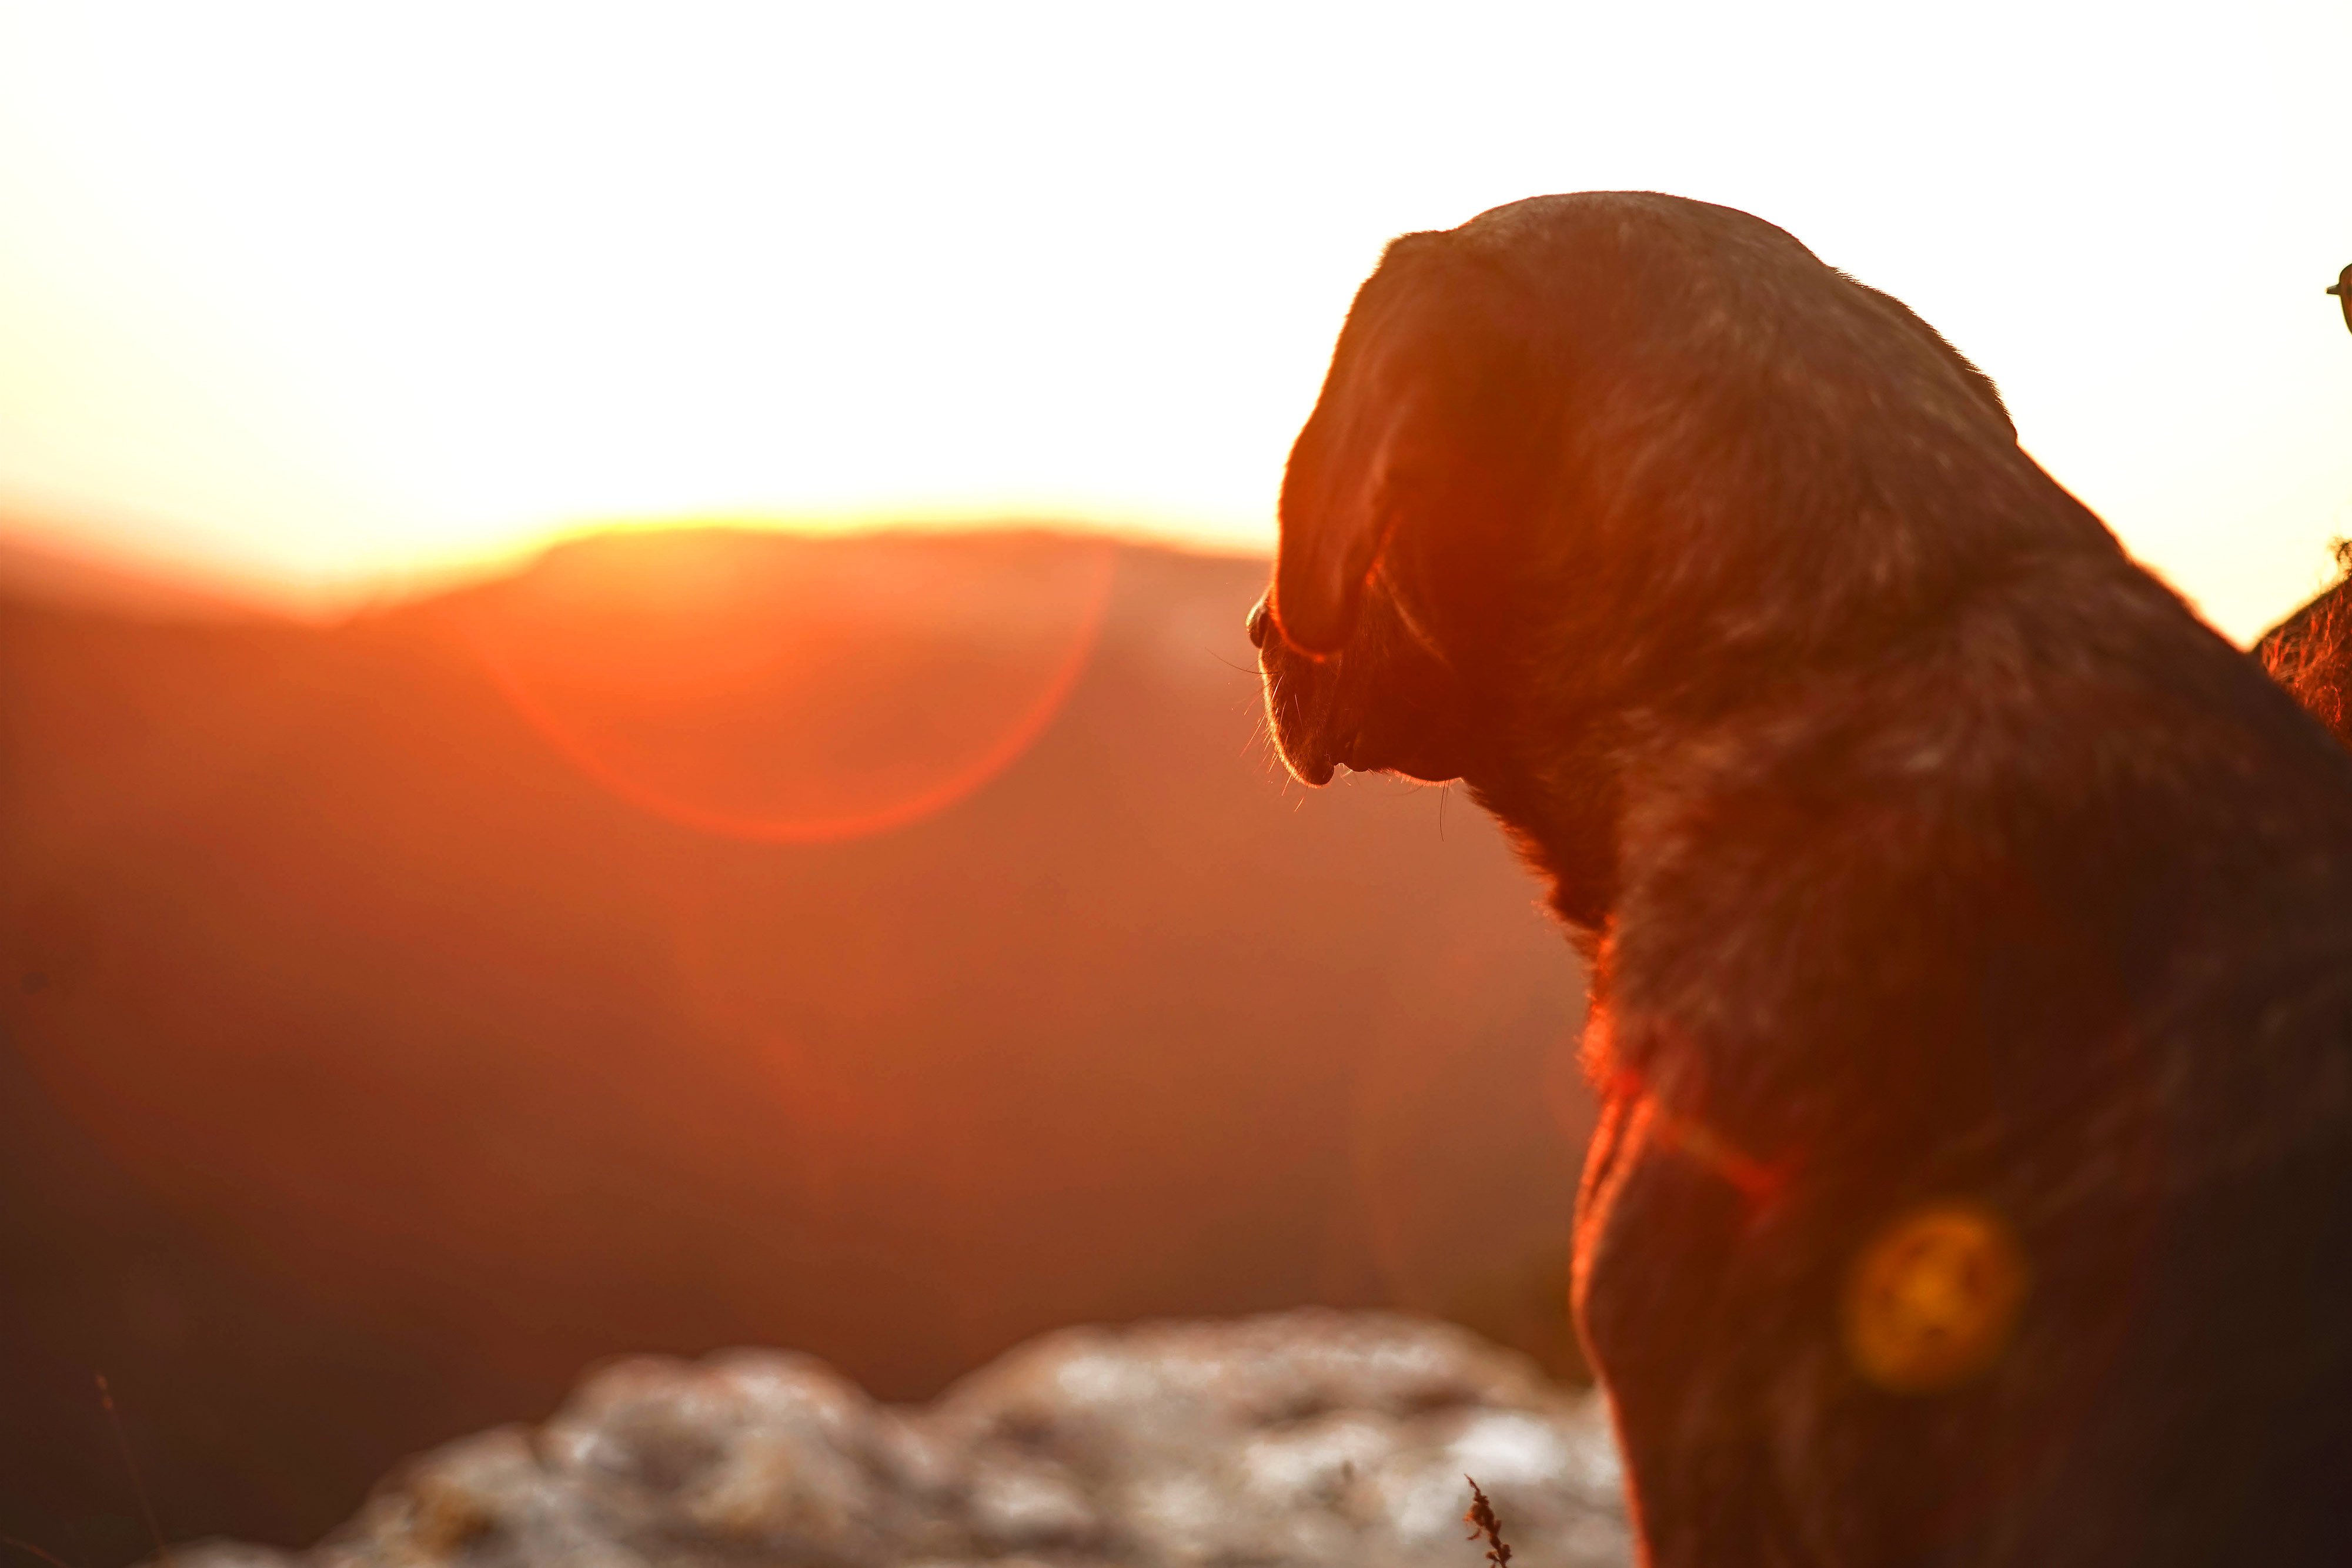 According to legend, dogs in southwest China would bark at the rare sight of sun in the springtime.  Photo: Shutterstock